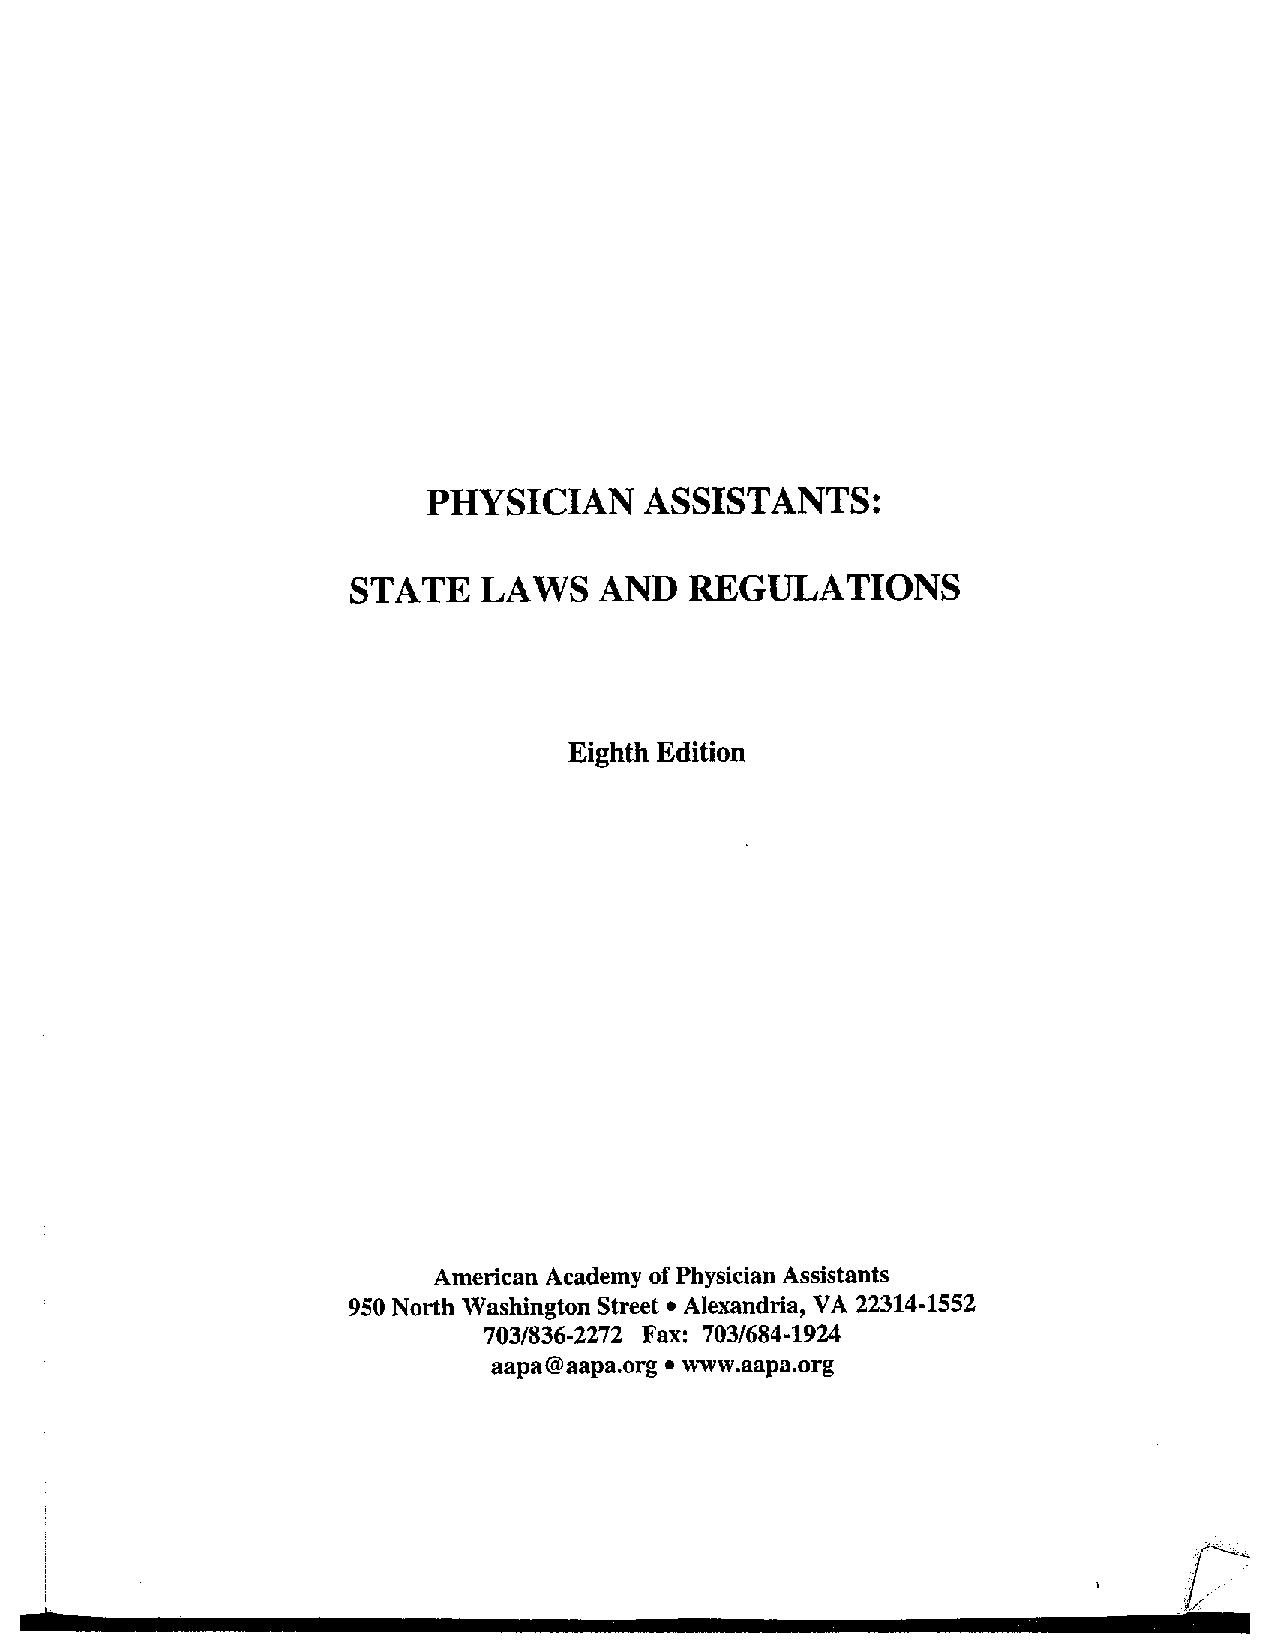 PA State Laws and Regulations 8th Edition